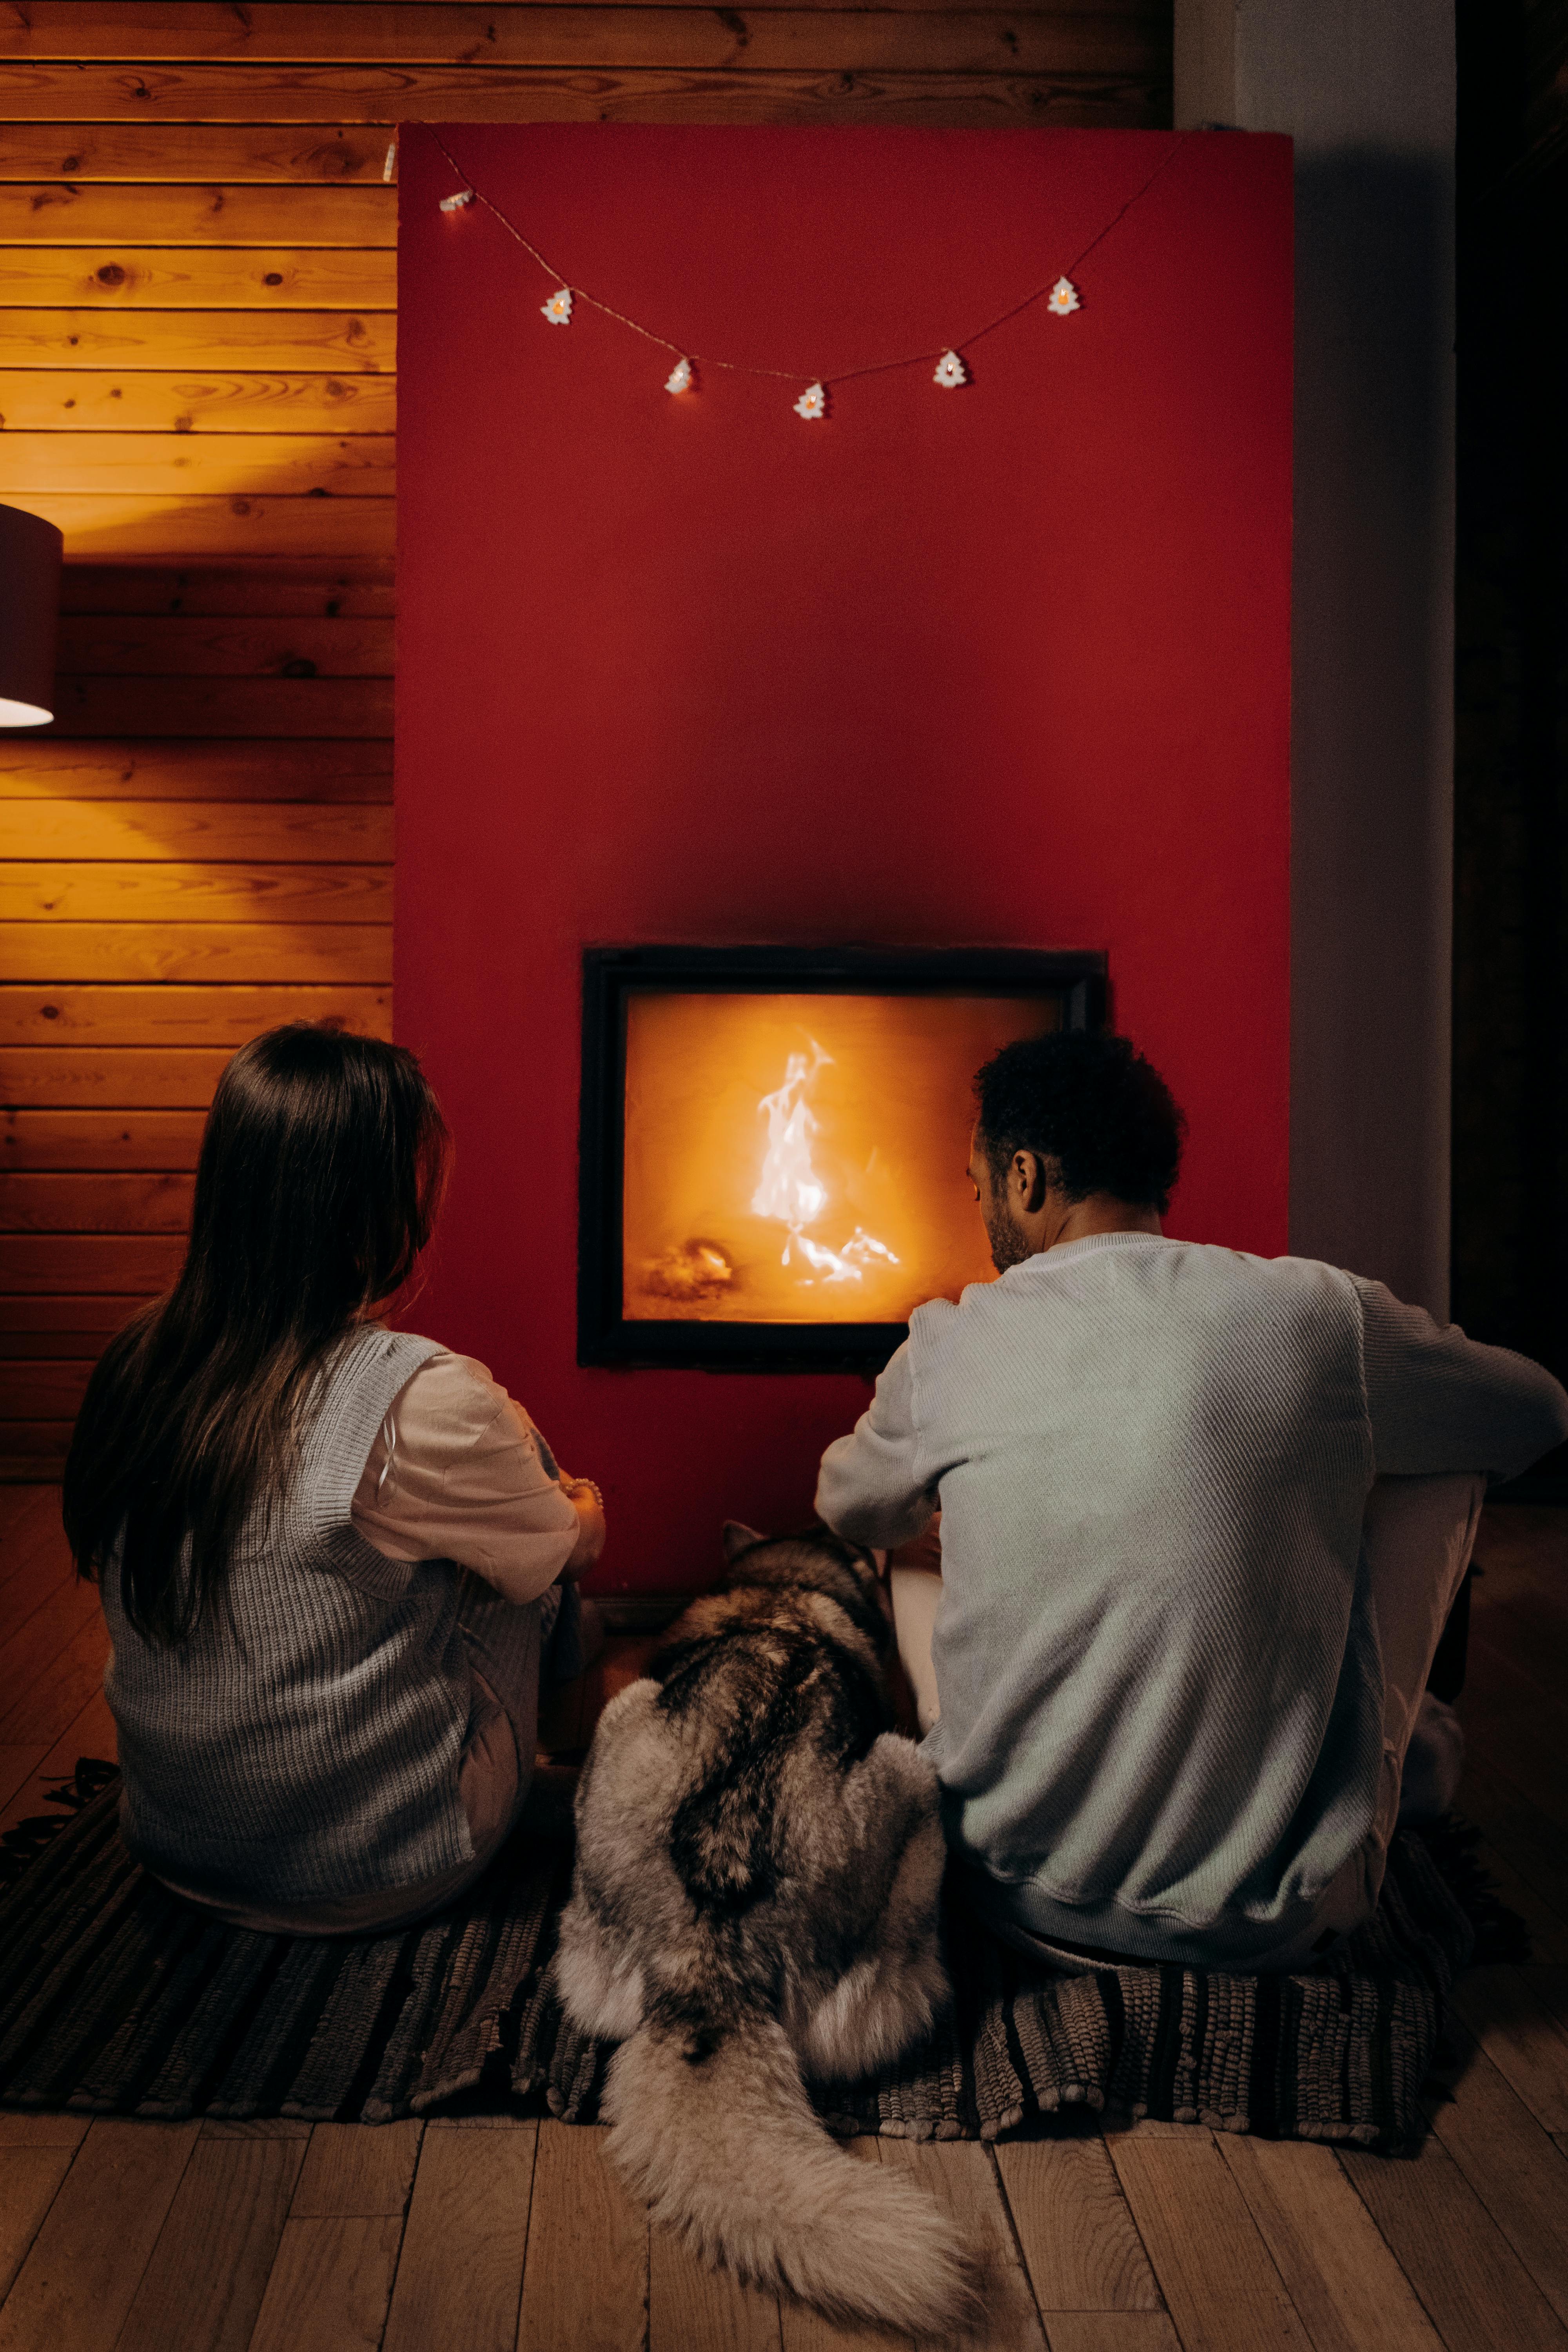 A couple sitting near the fireplace with a dog | Source: Pexels